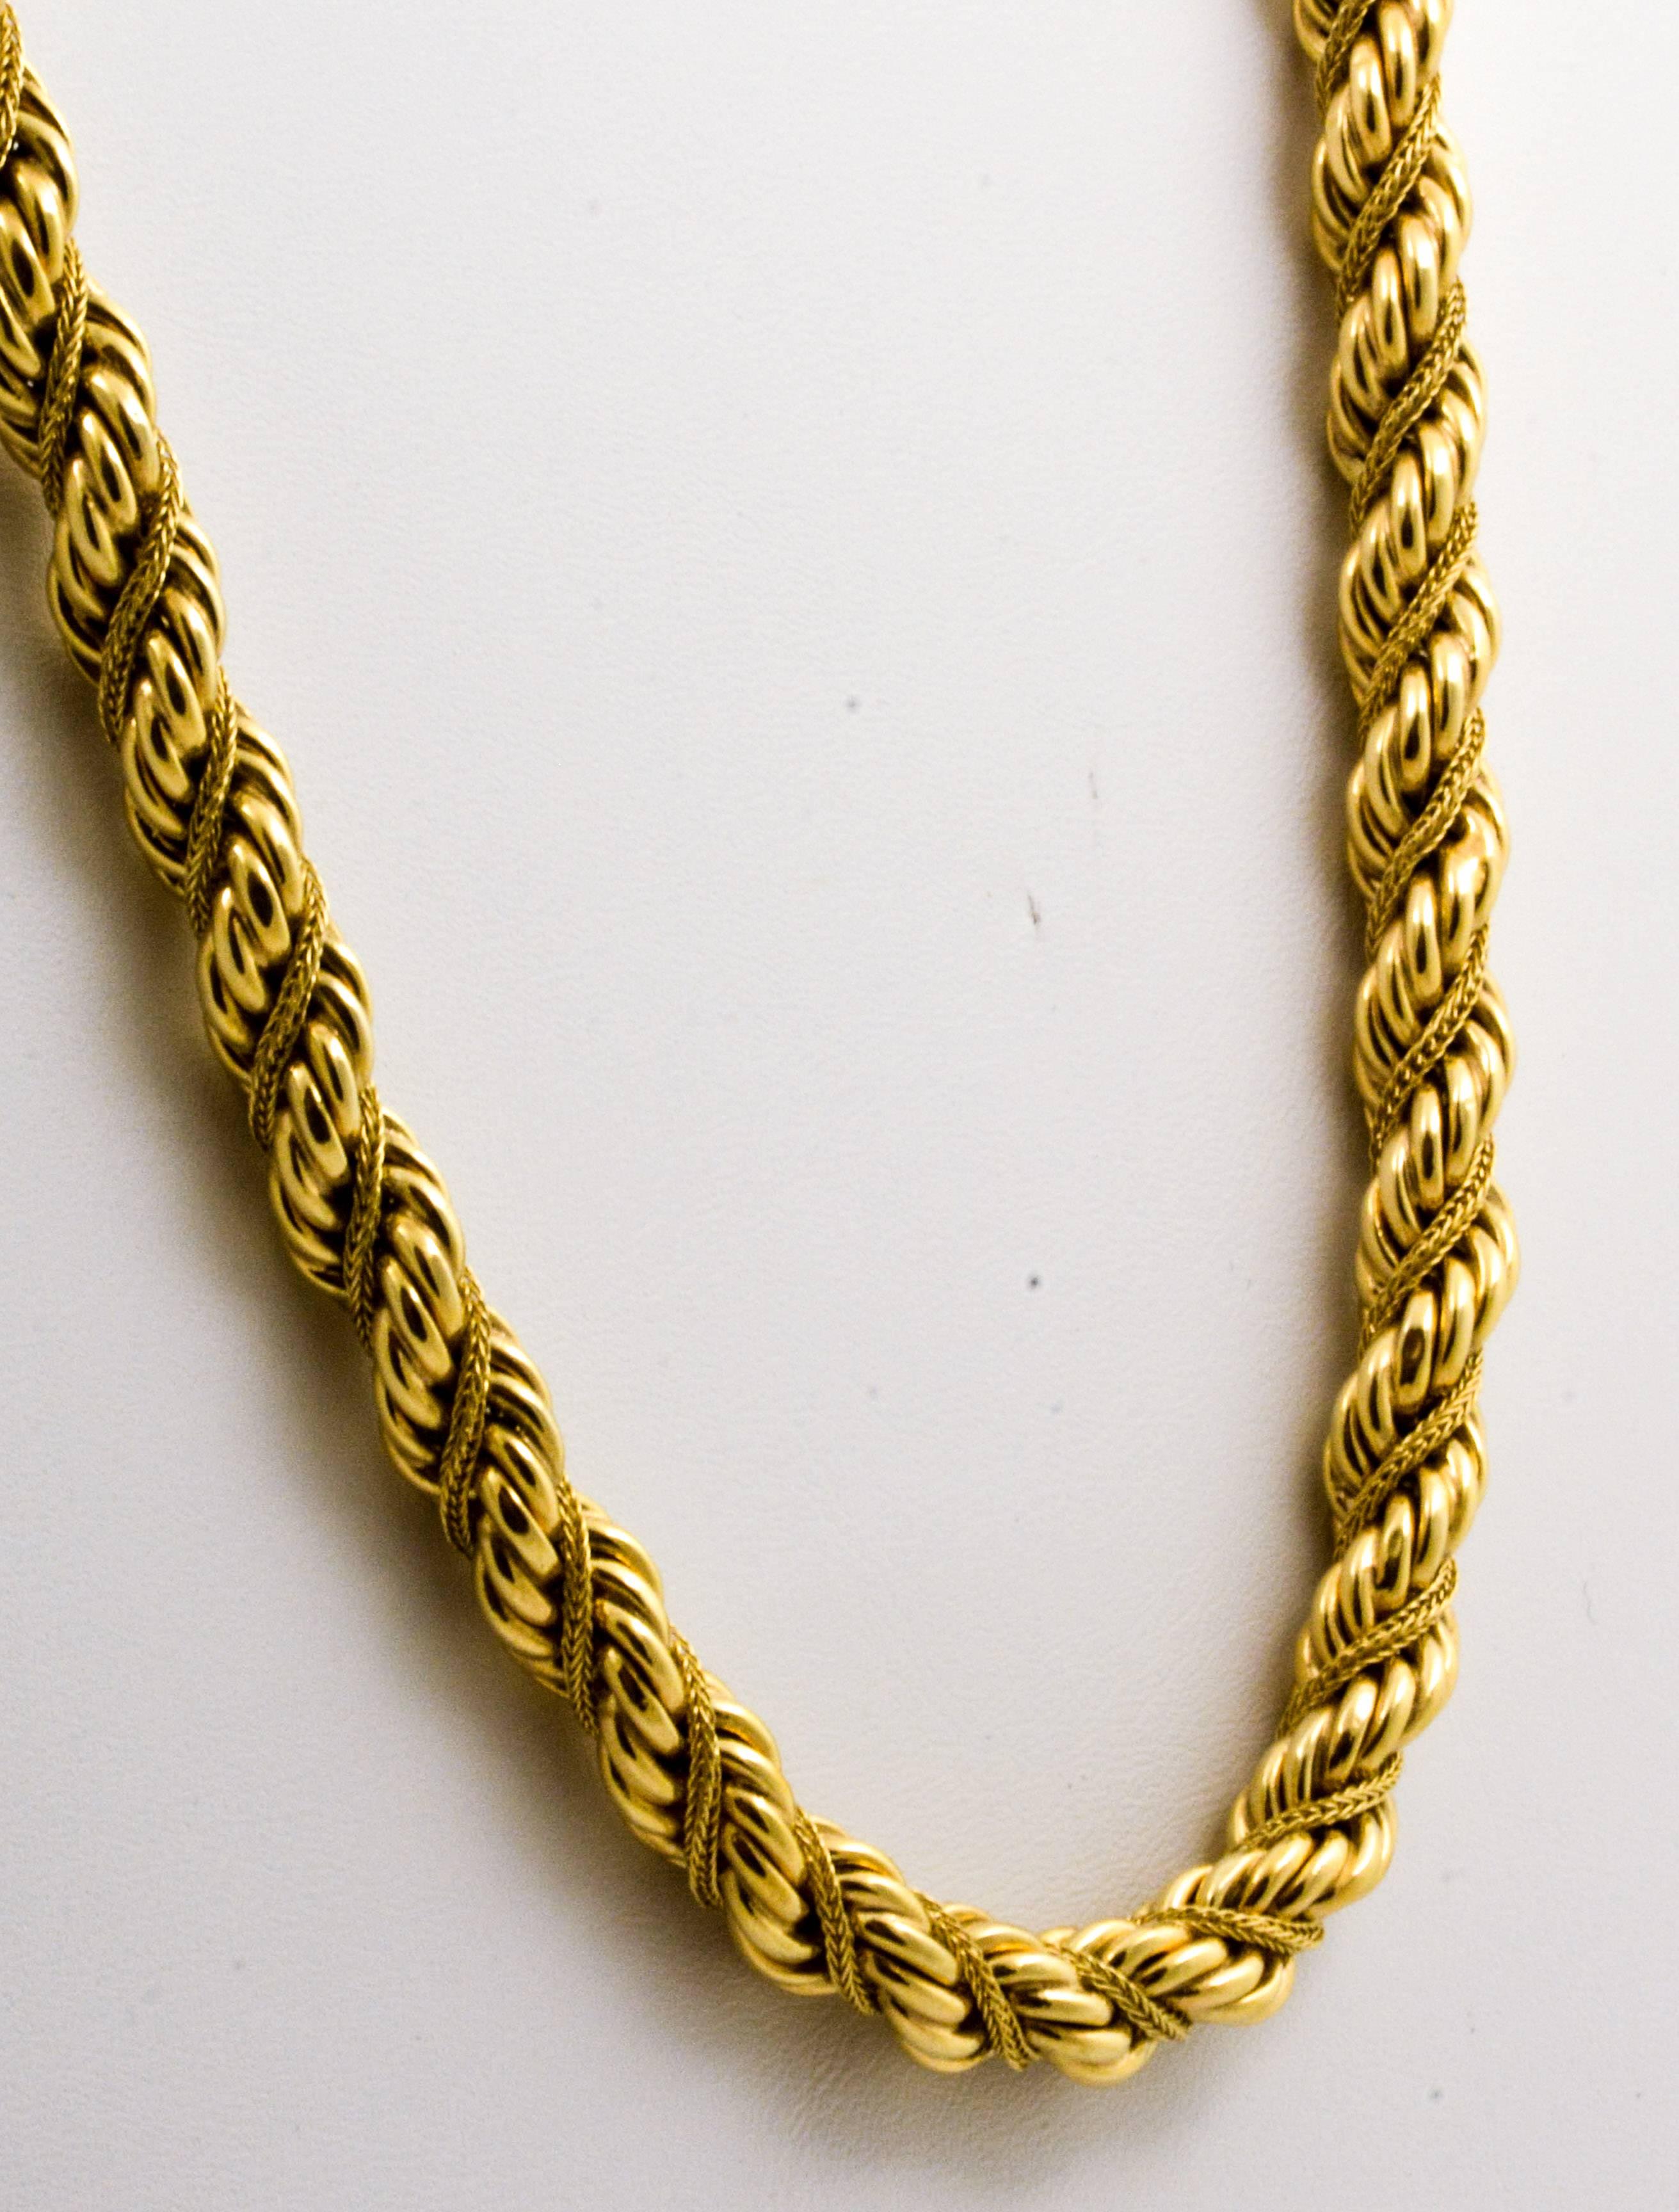 Modern Gold Braided Rope Necklace